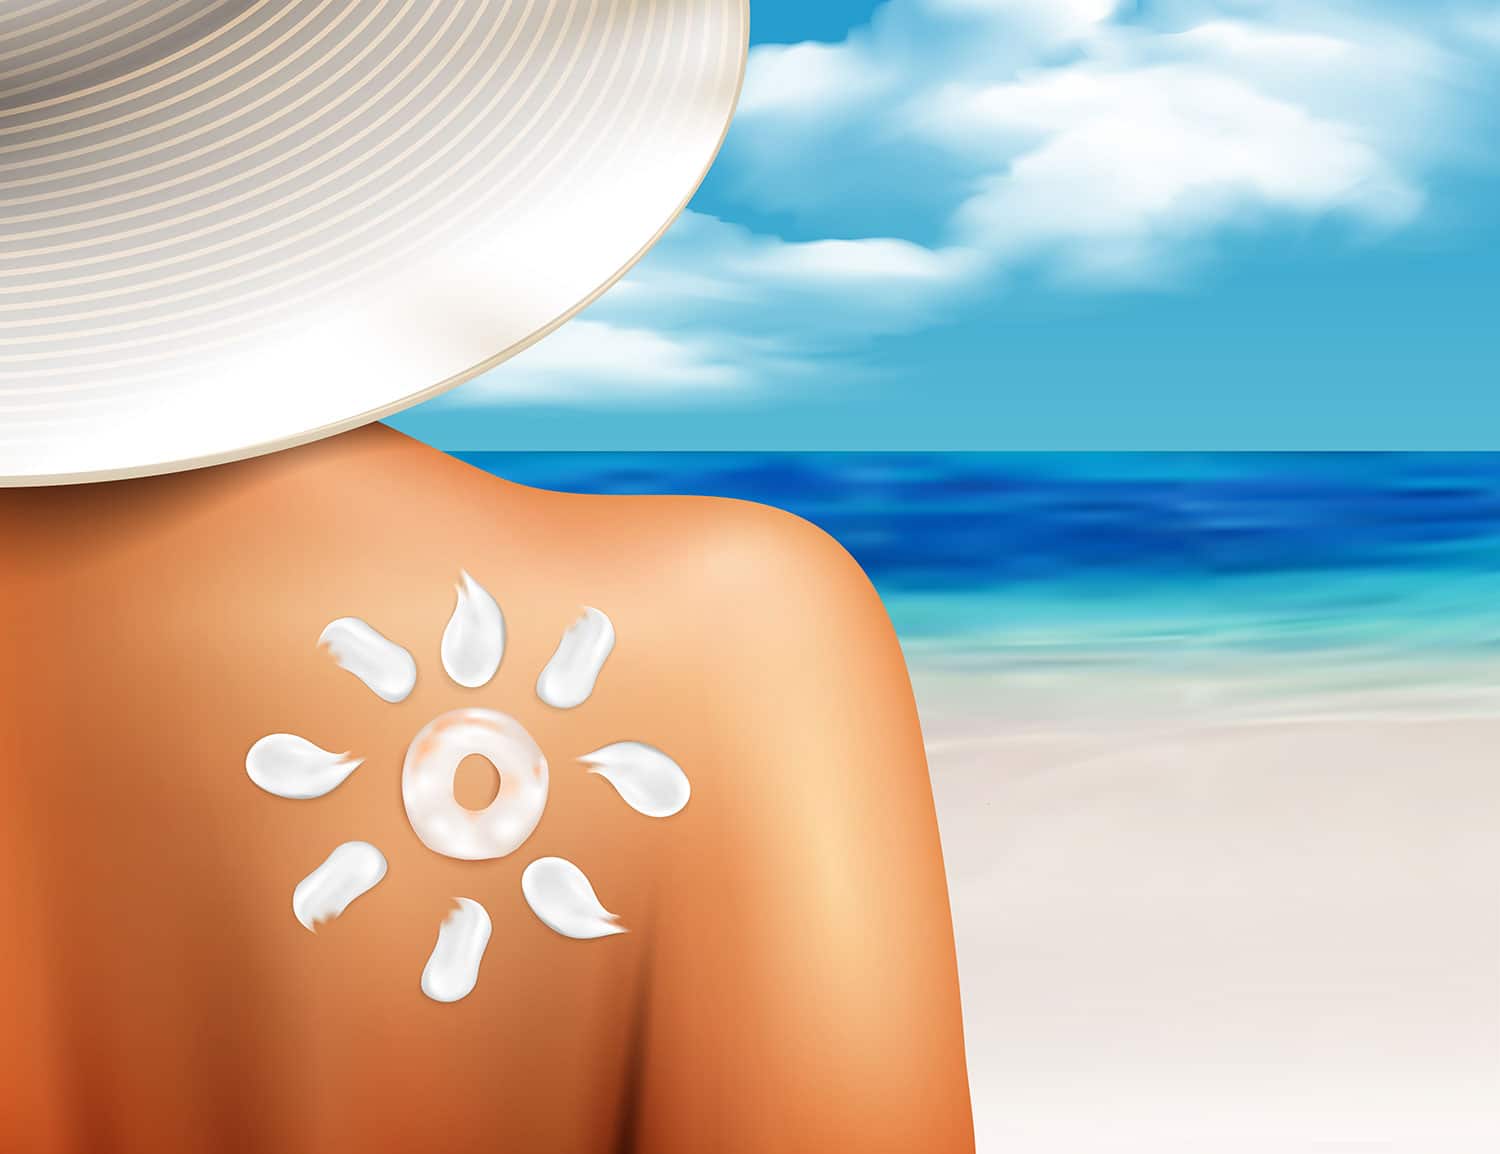 Genetic variations in the skin can create a natural sunscreen